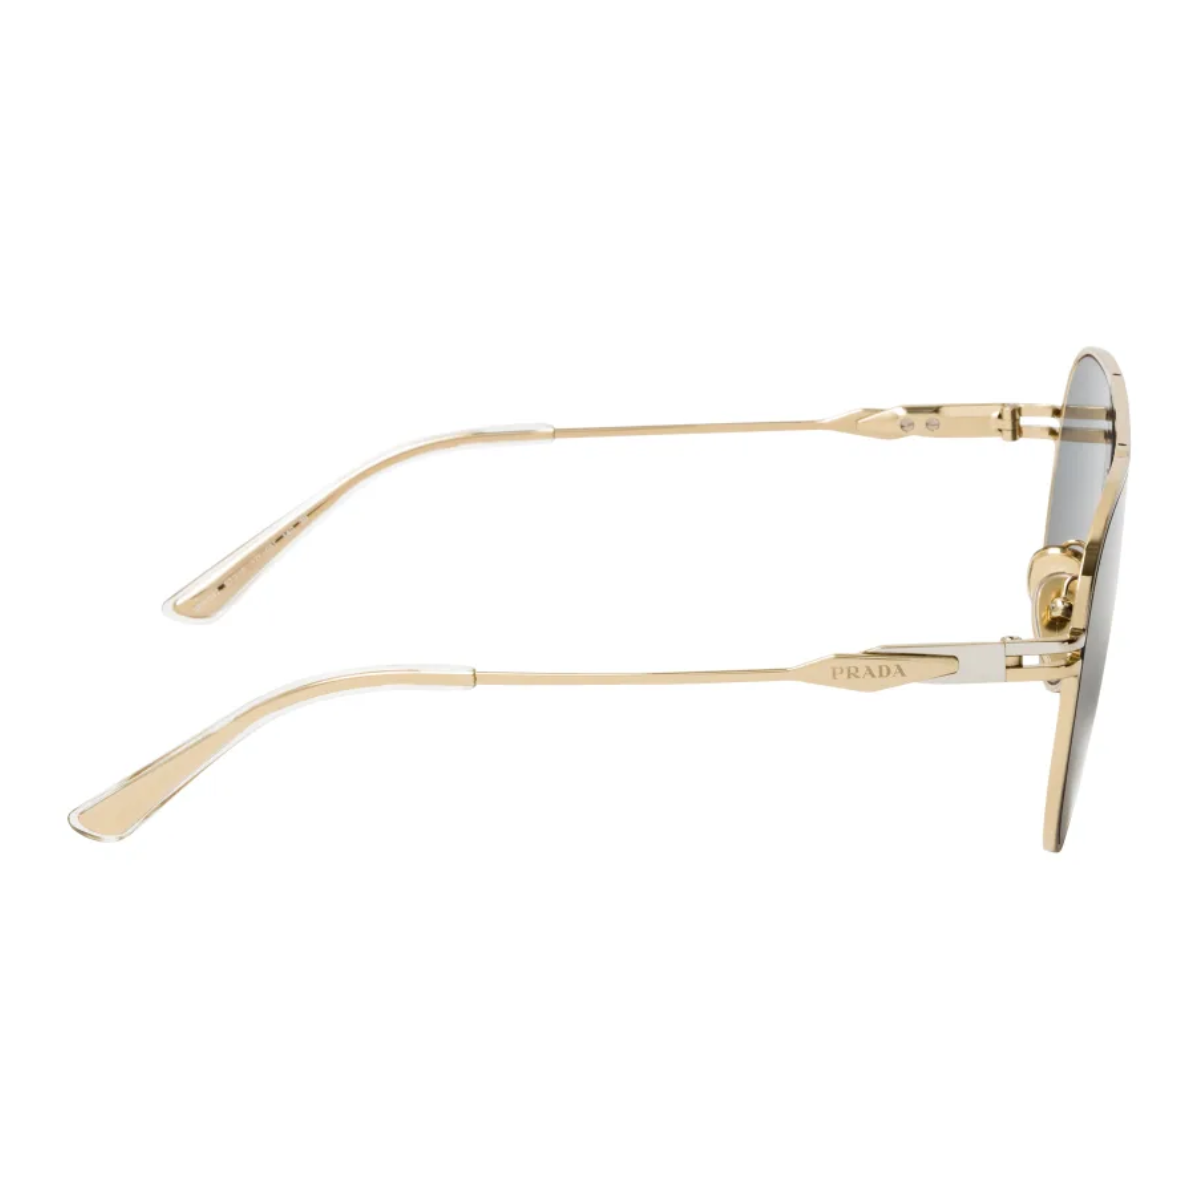 "Shop now at Optorium for authentic Prada SPR 54Z 17F 09T Gold aviator sunglasses for men. Never wonder 'where can I find sunglasses near me?' again with our extensive selection of designer eyewear."